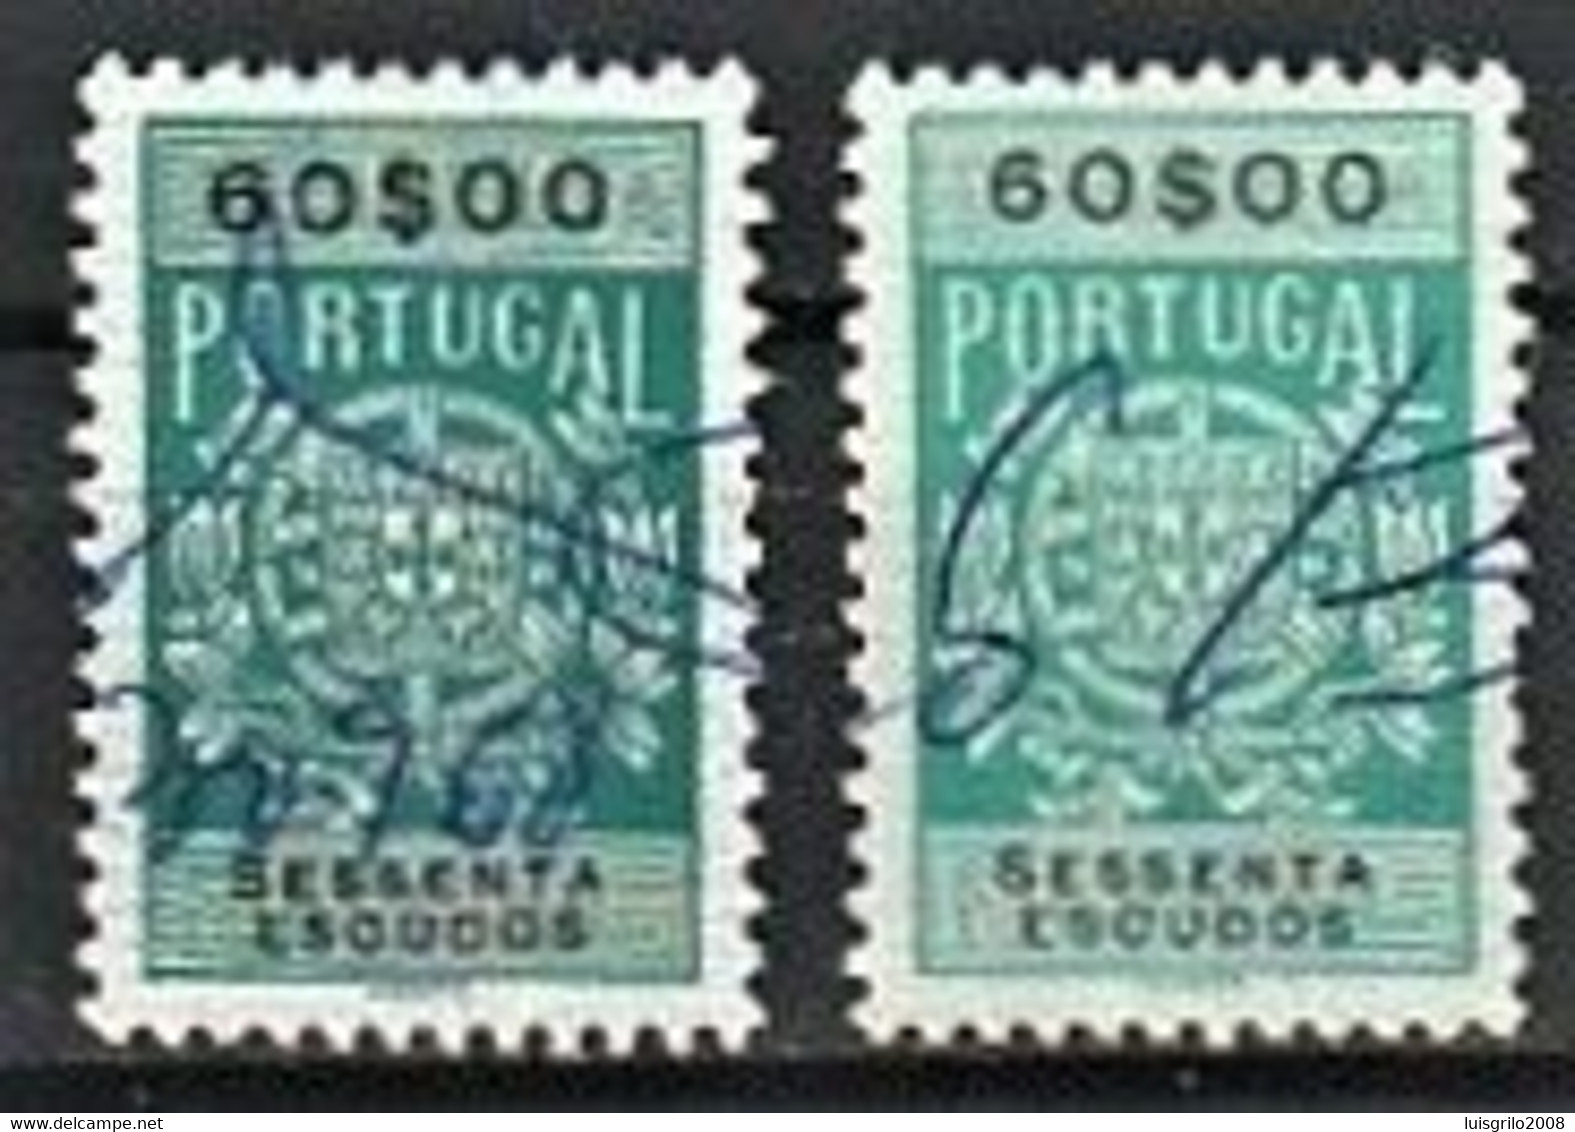 Fiscal/ Revenue, Portugal 1940 - Estampilha Fiscal -|- 60$00 - COLOR VARIANT - Is The Stamp Of The Right - Used Stamps